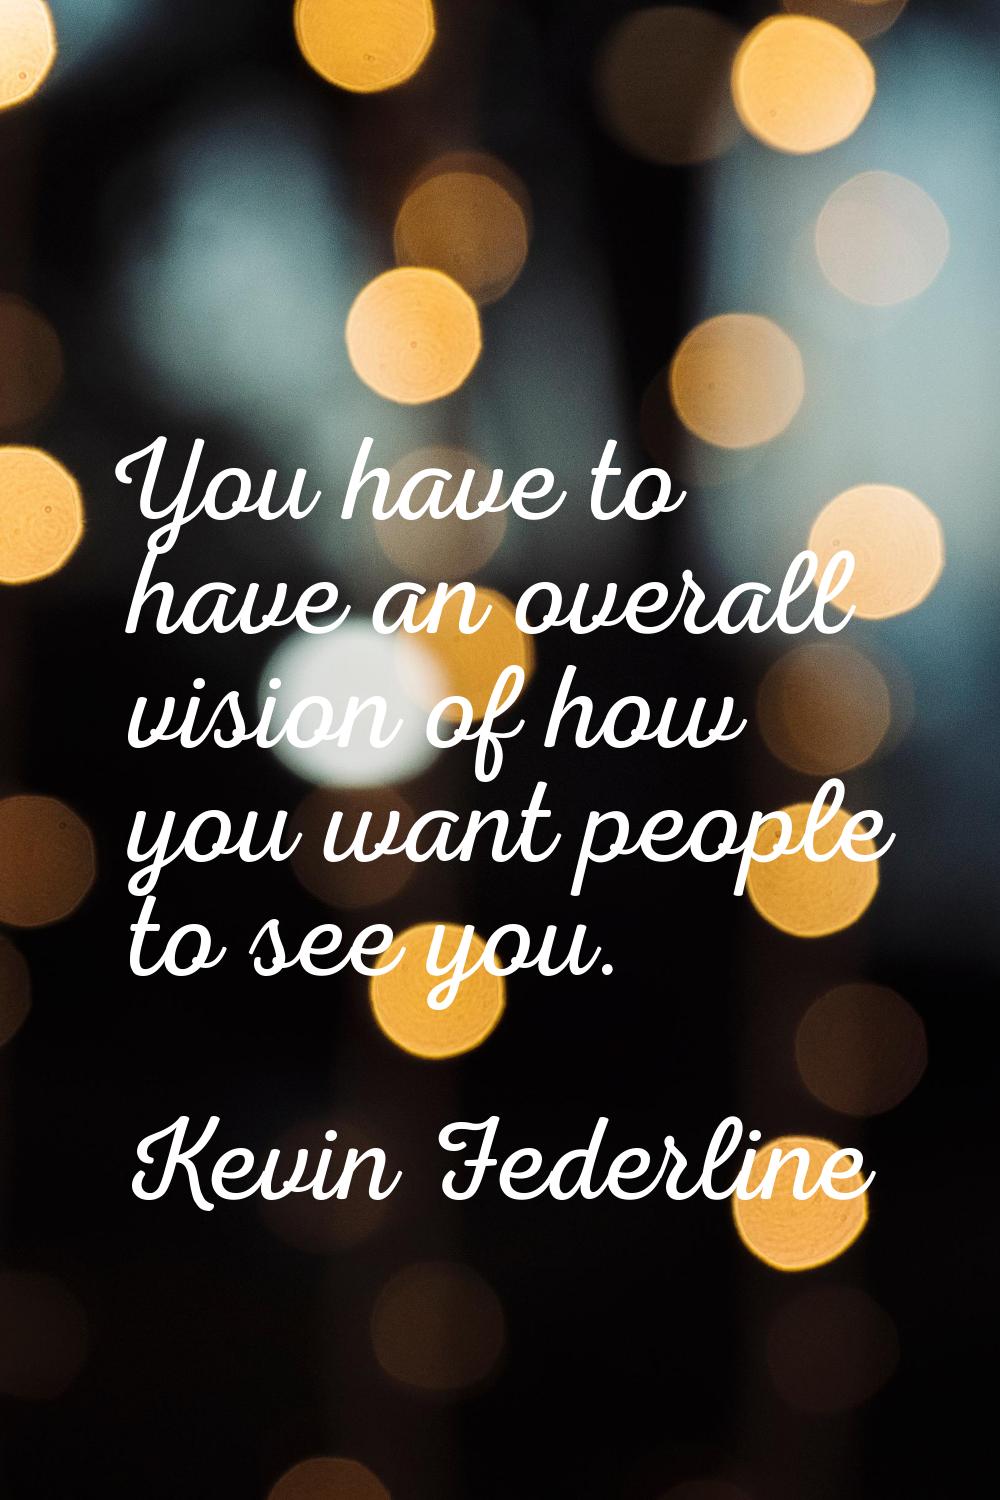 You have to have an overall vision of how you want people to see you.